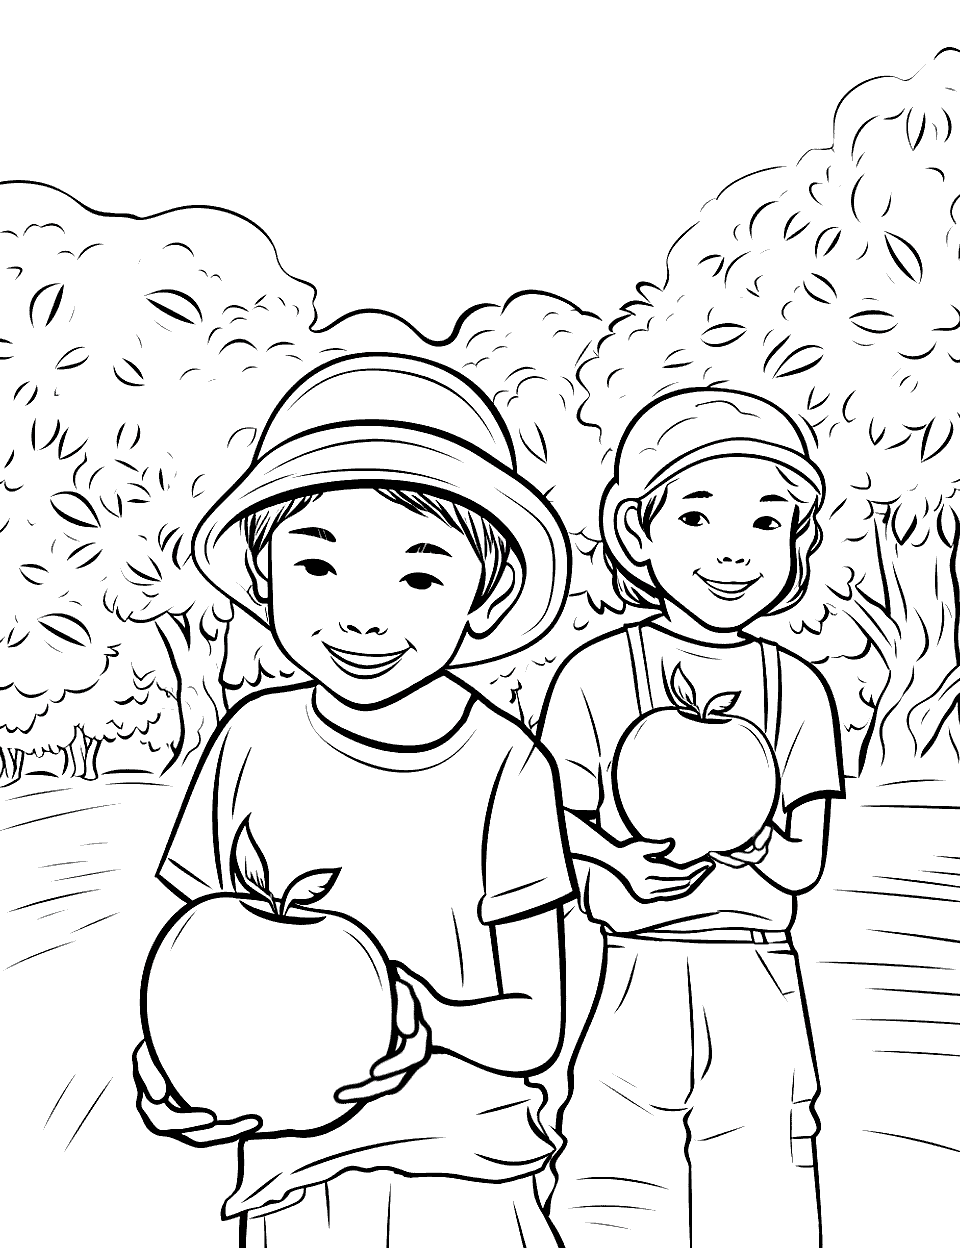 Apple Orchard Adventure Coloring Page - A detailed scene of kids exploring an apple orchard.